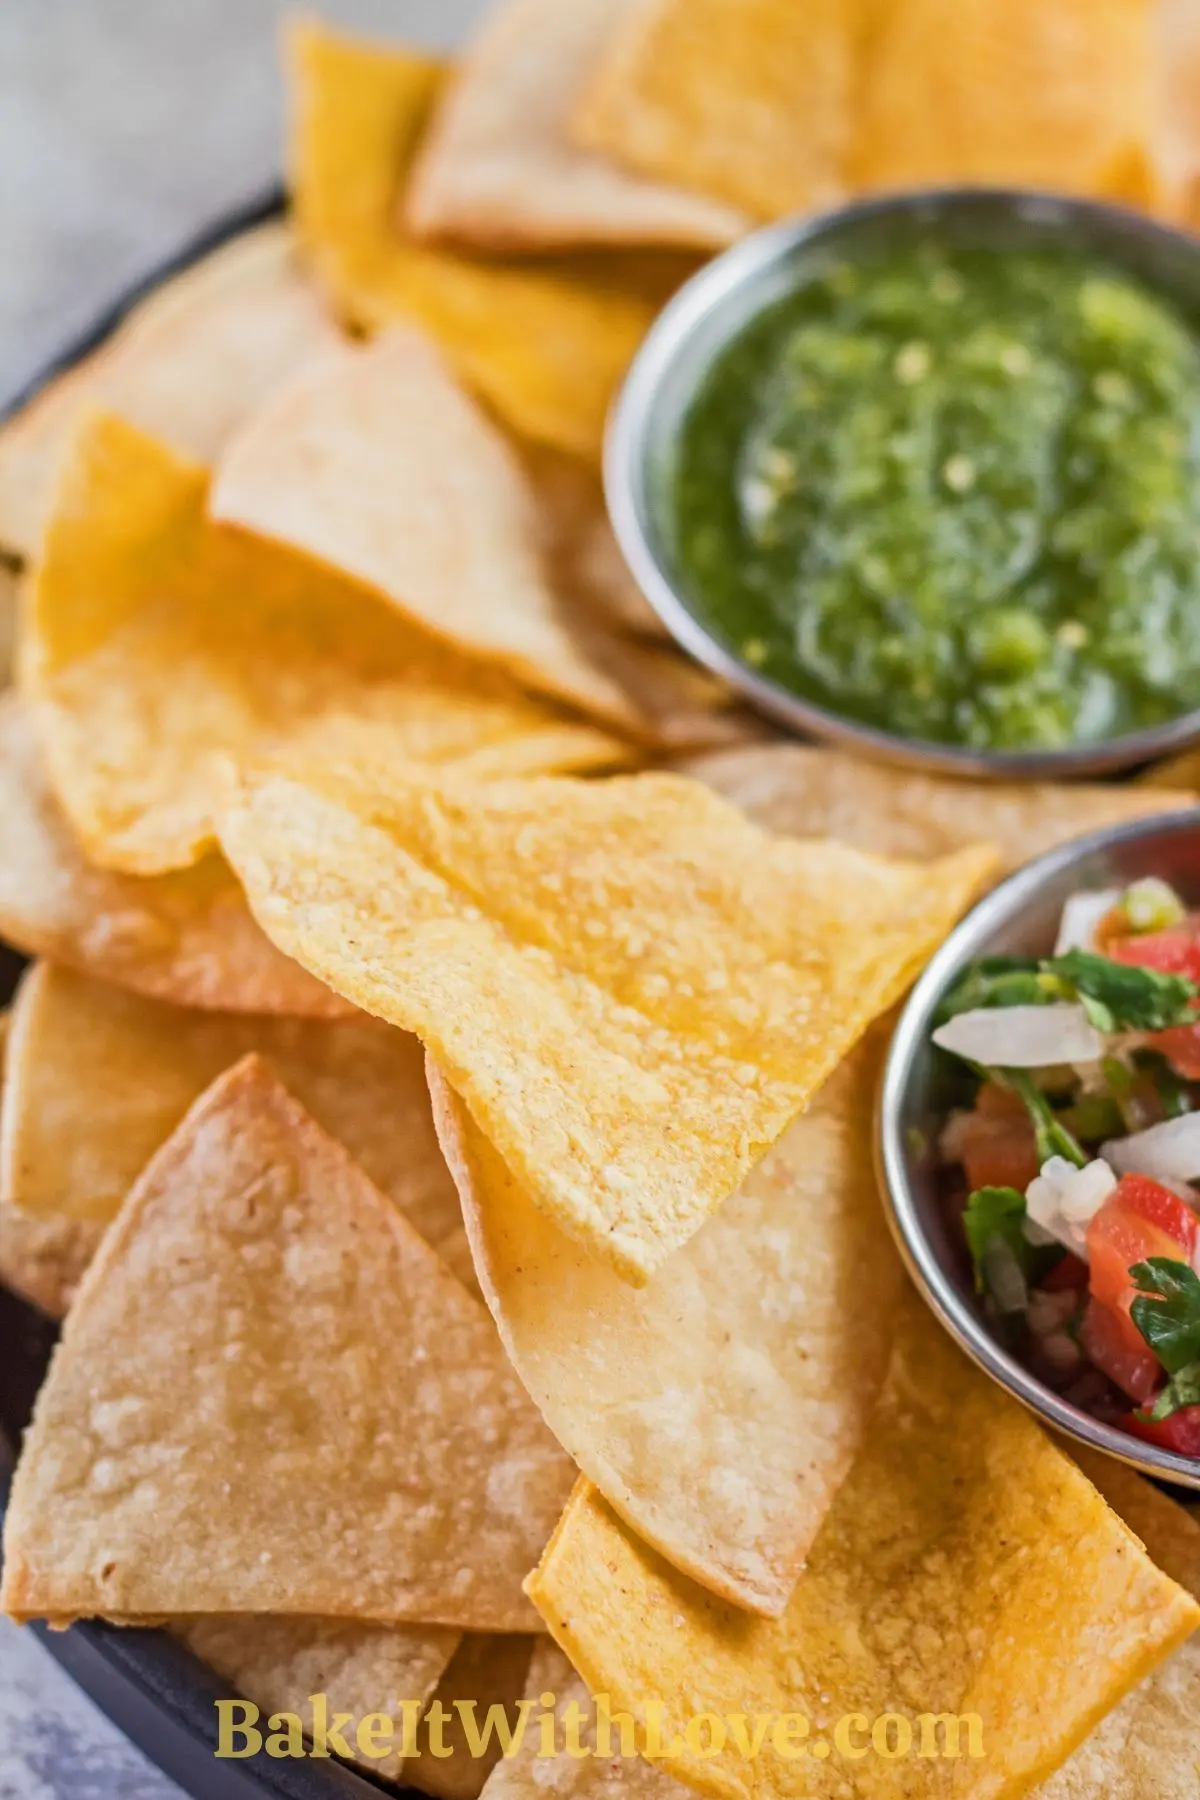 Air fryer tortilla chips served with pico de gallo and salsa verde.